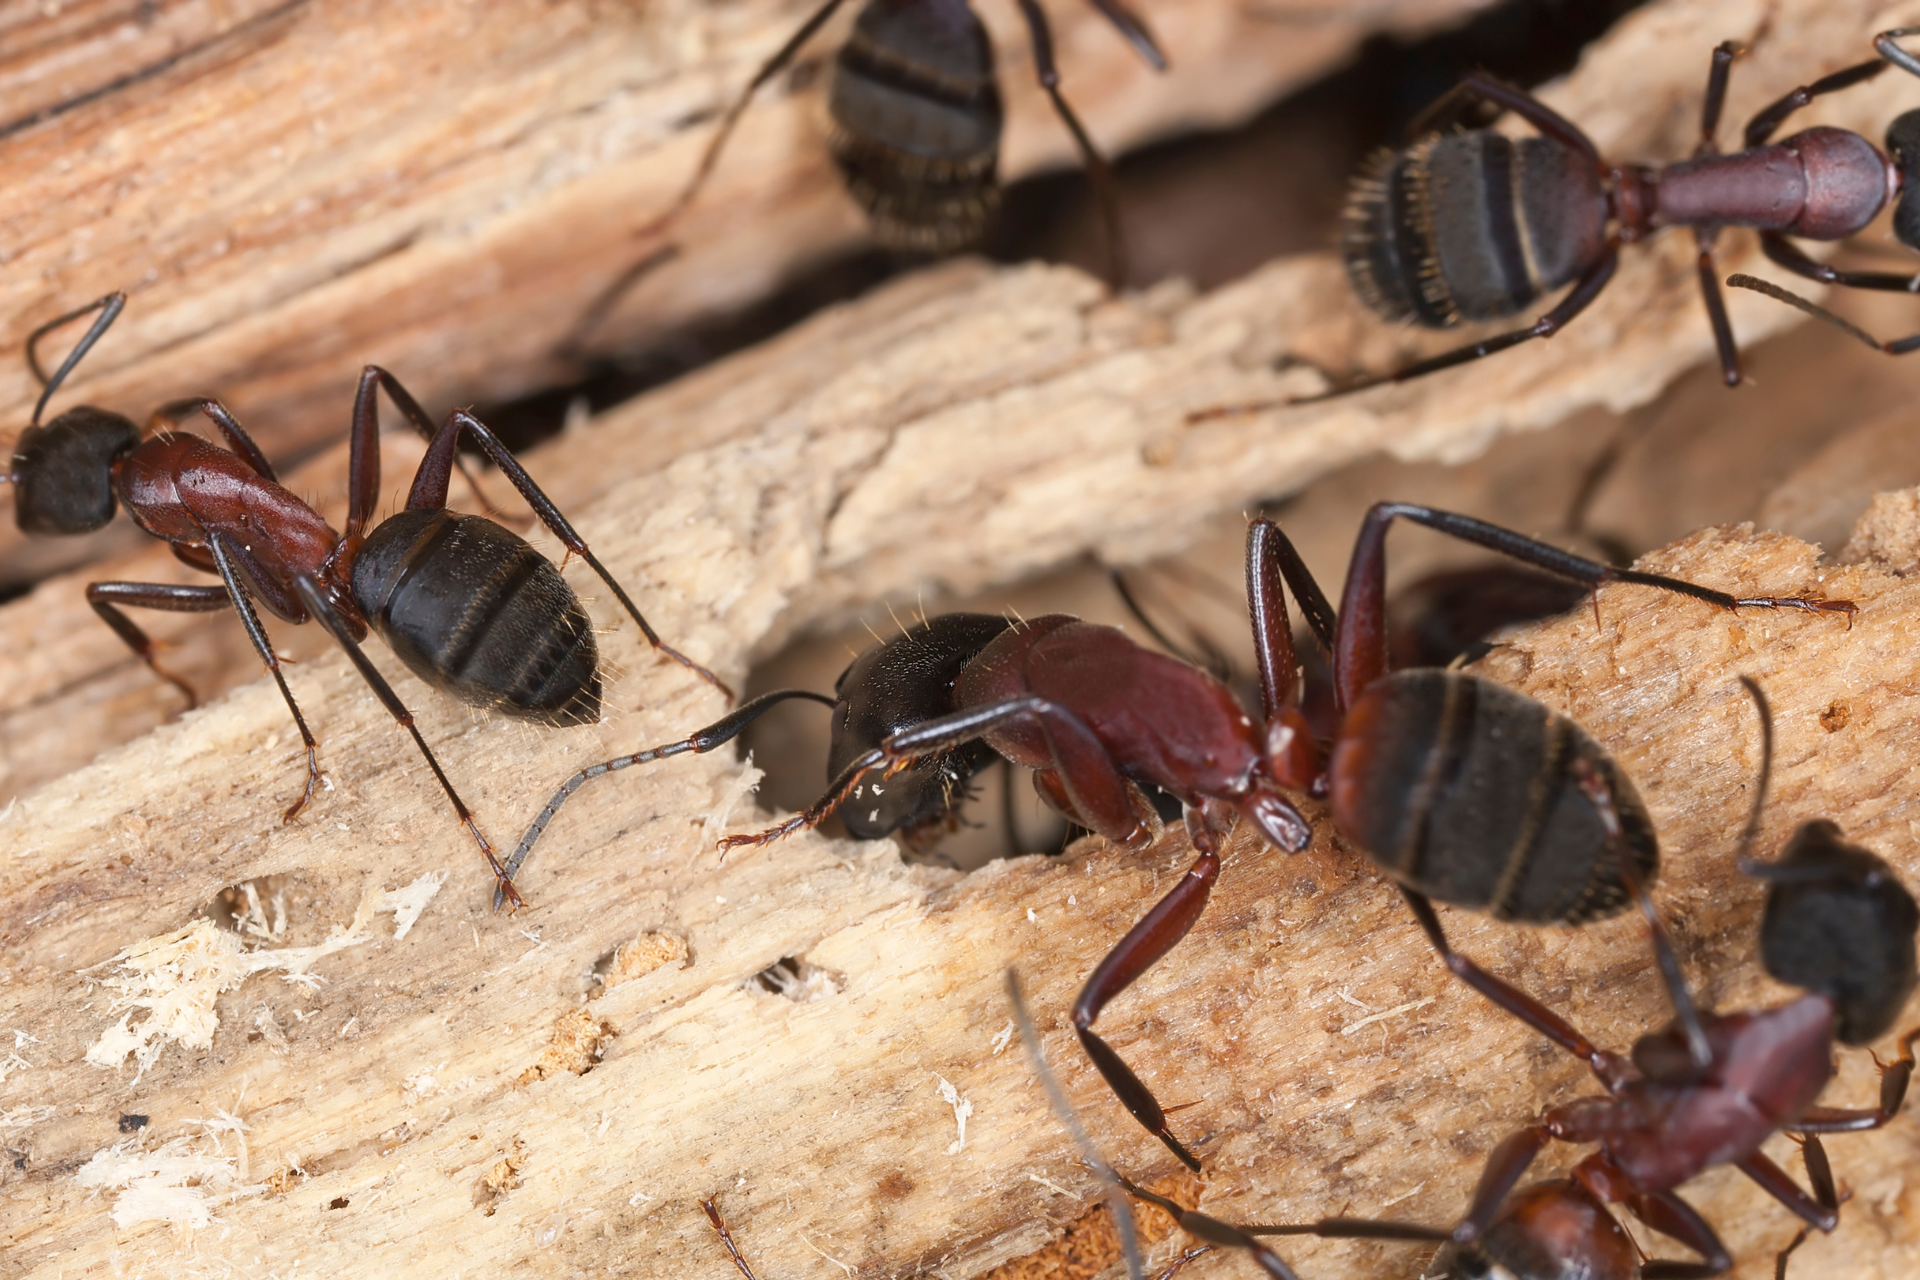 A group of ants are crawling on a piece of wood.